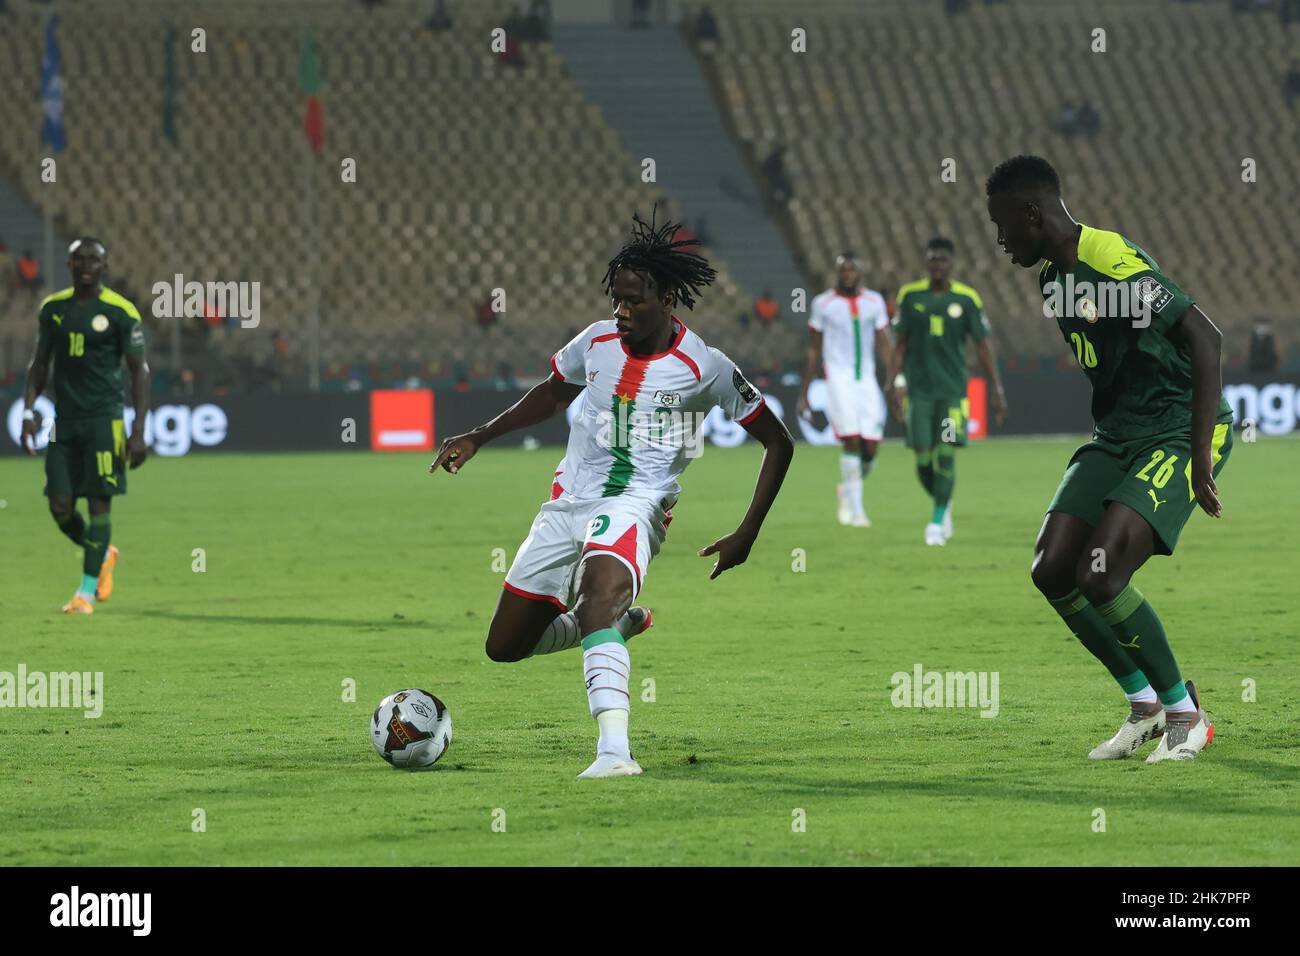 CAMEROON, Yaounde, 02 February 2022 - Issa Kabore of Burkina Faso and Pape Gueye of Senegal during the Africa Cup of Nations play offs semi final match between Burkina Faso and Senegal at Stade Ahmadou Ahidjo,Yaounde, Cameroon, 02/02/2022/ Photo by SF Stock Photo